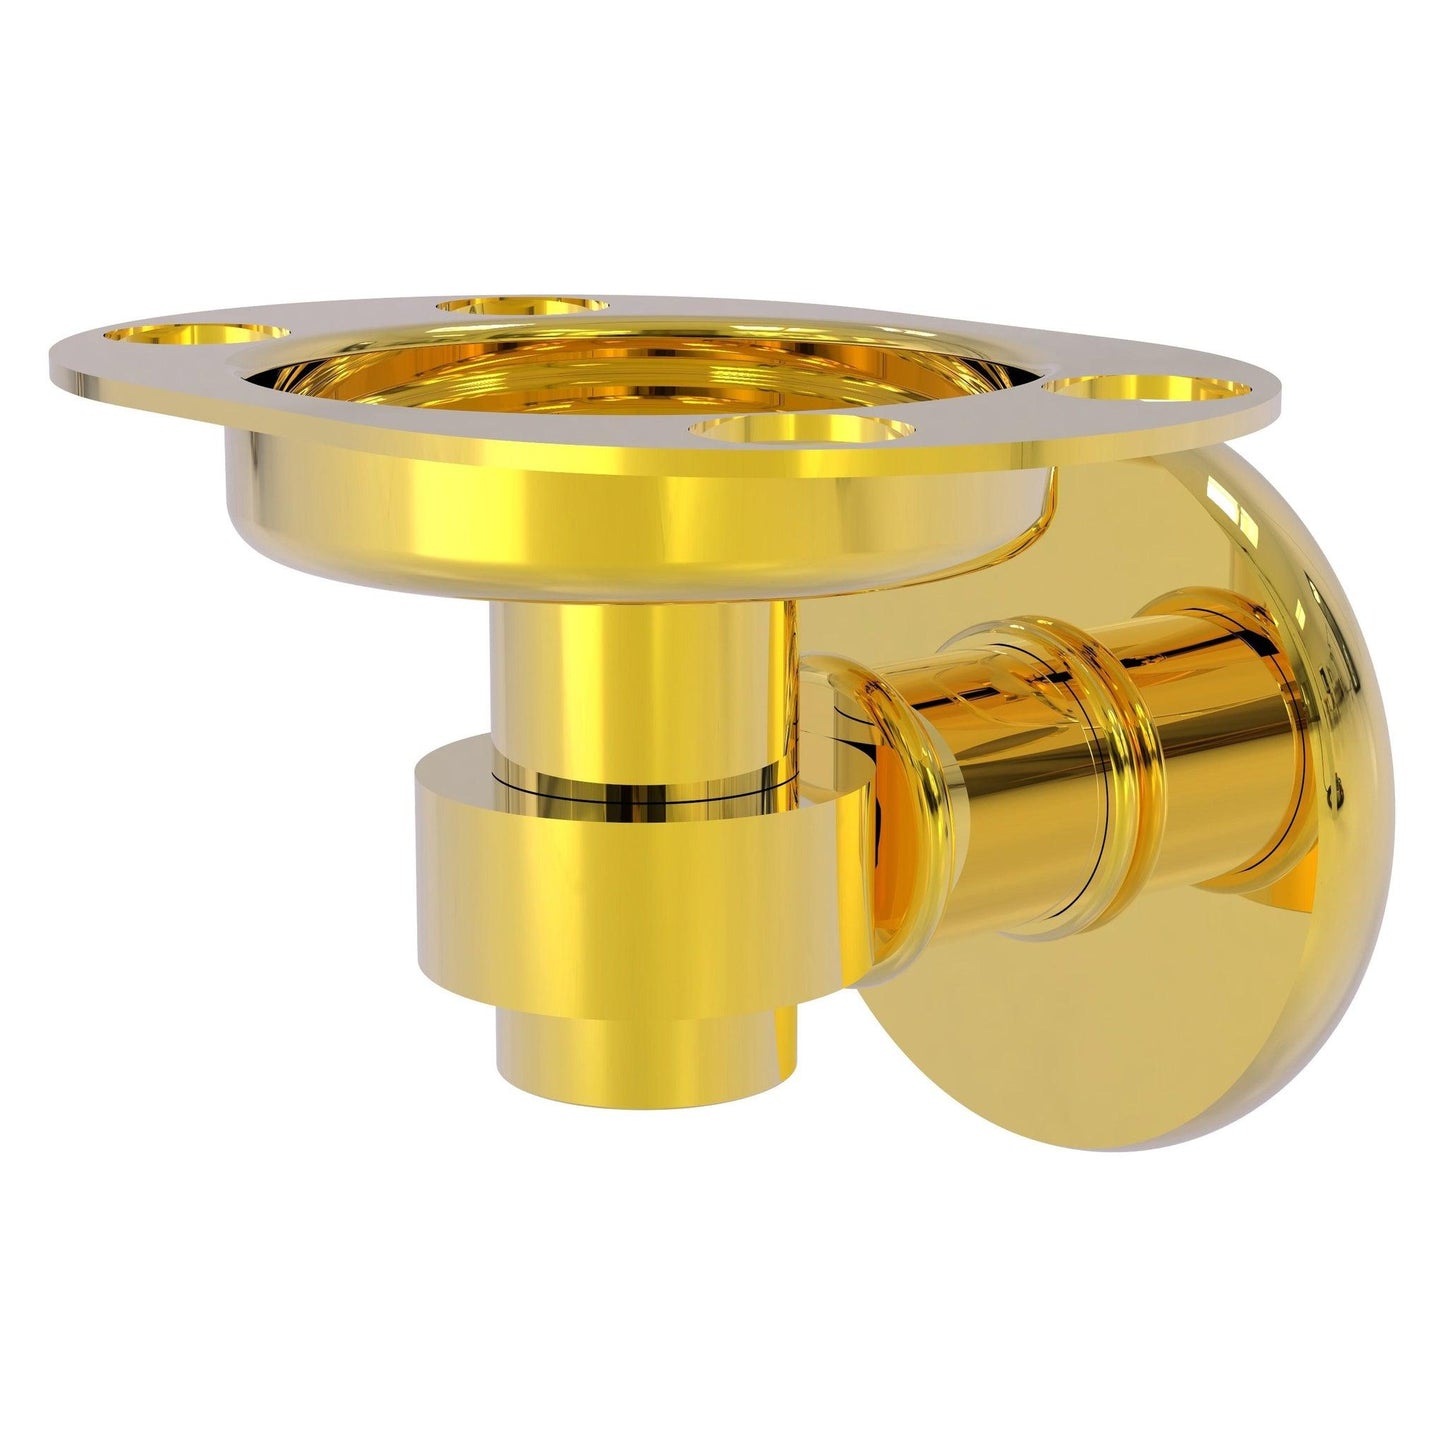 Allied Brass Continental 4.5" x 3.5" Polished Brass Solid Brass Tumbler Toothbrush Holder